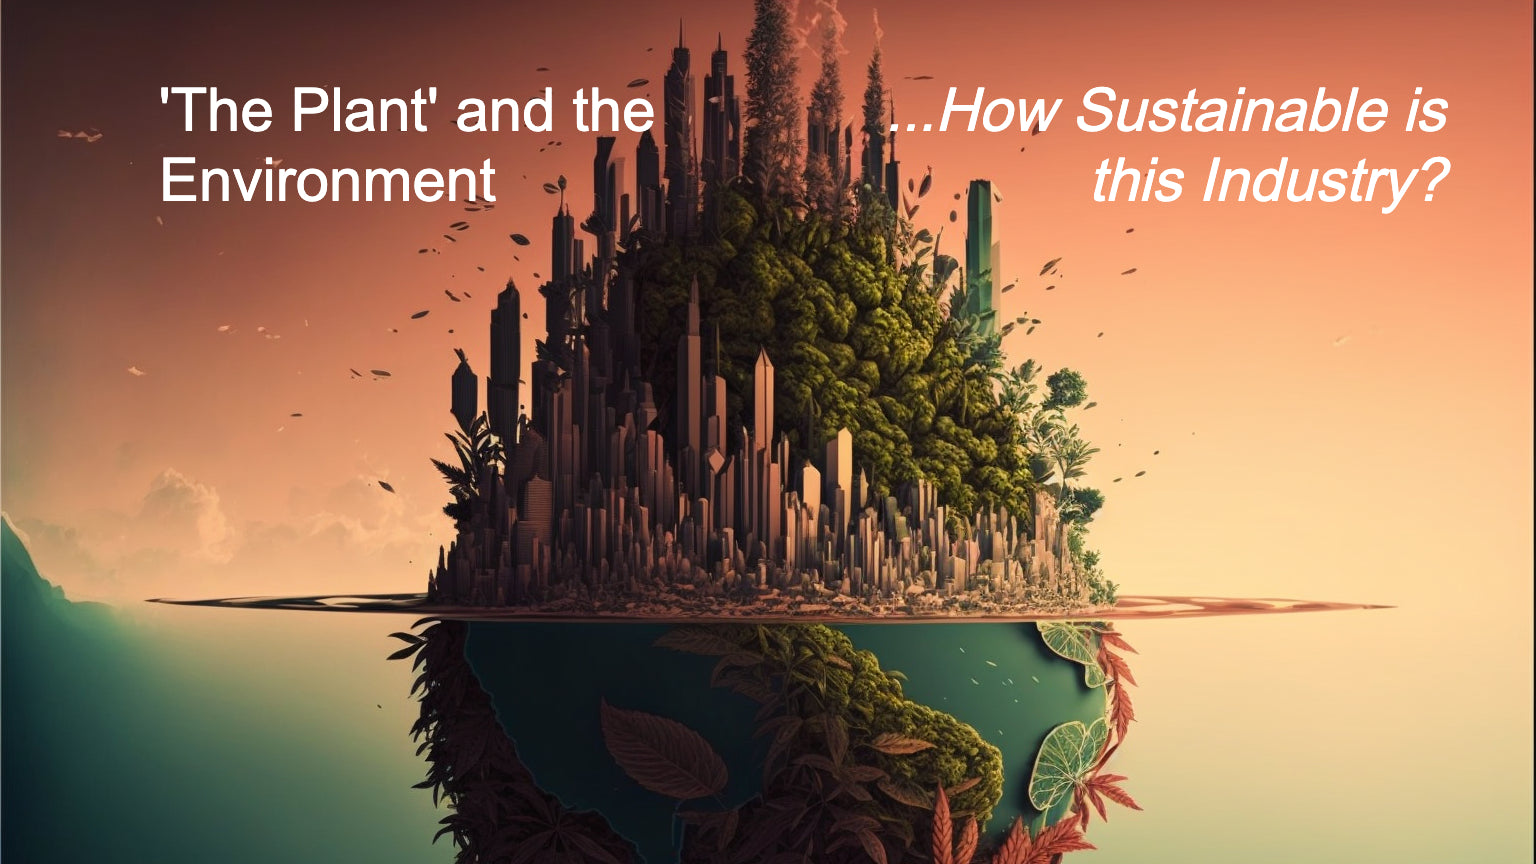 'The Plant' and the Environment: How Sustainable is this Industry?